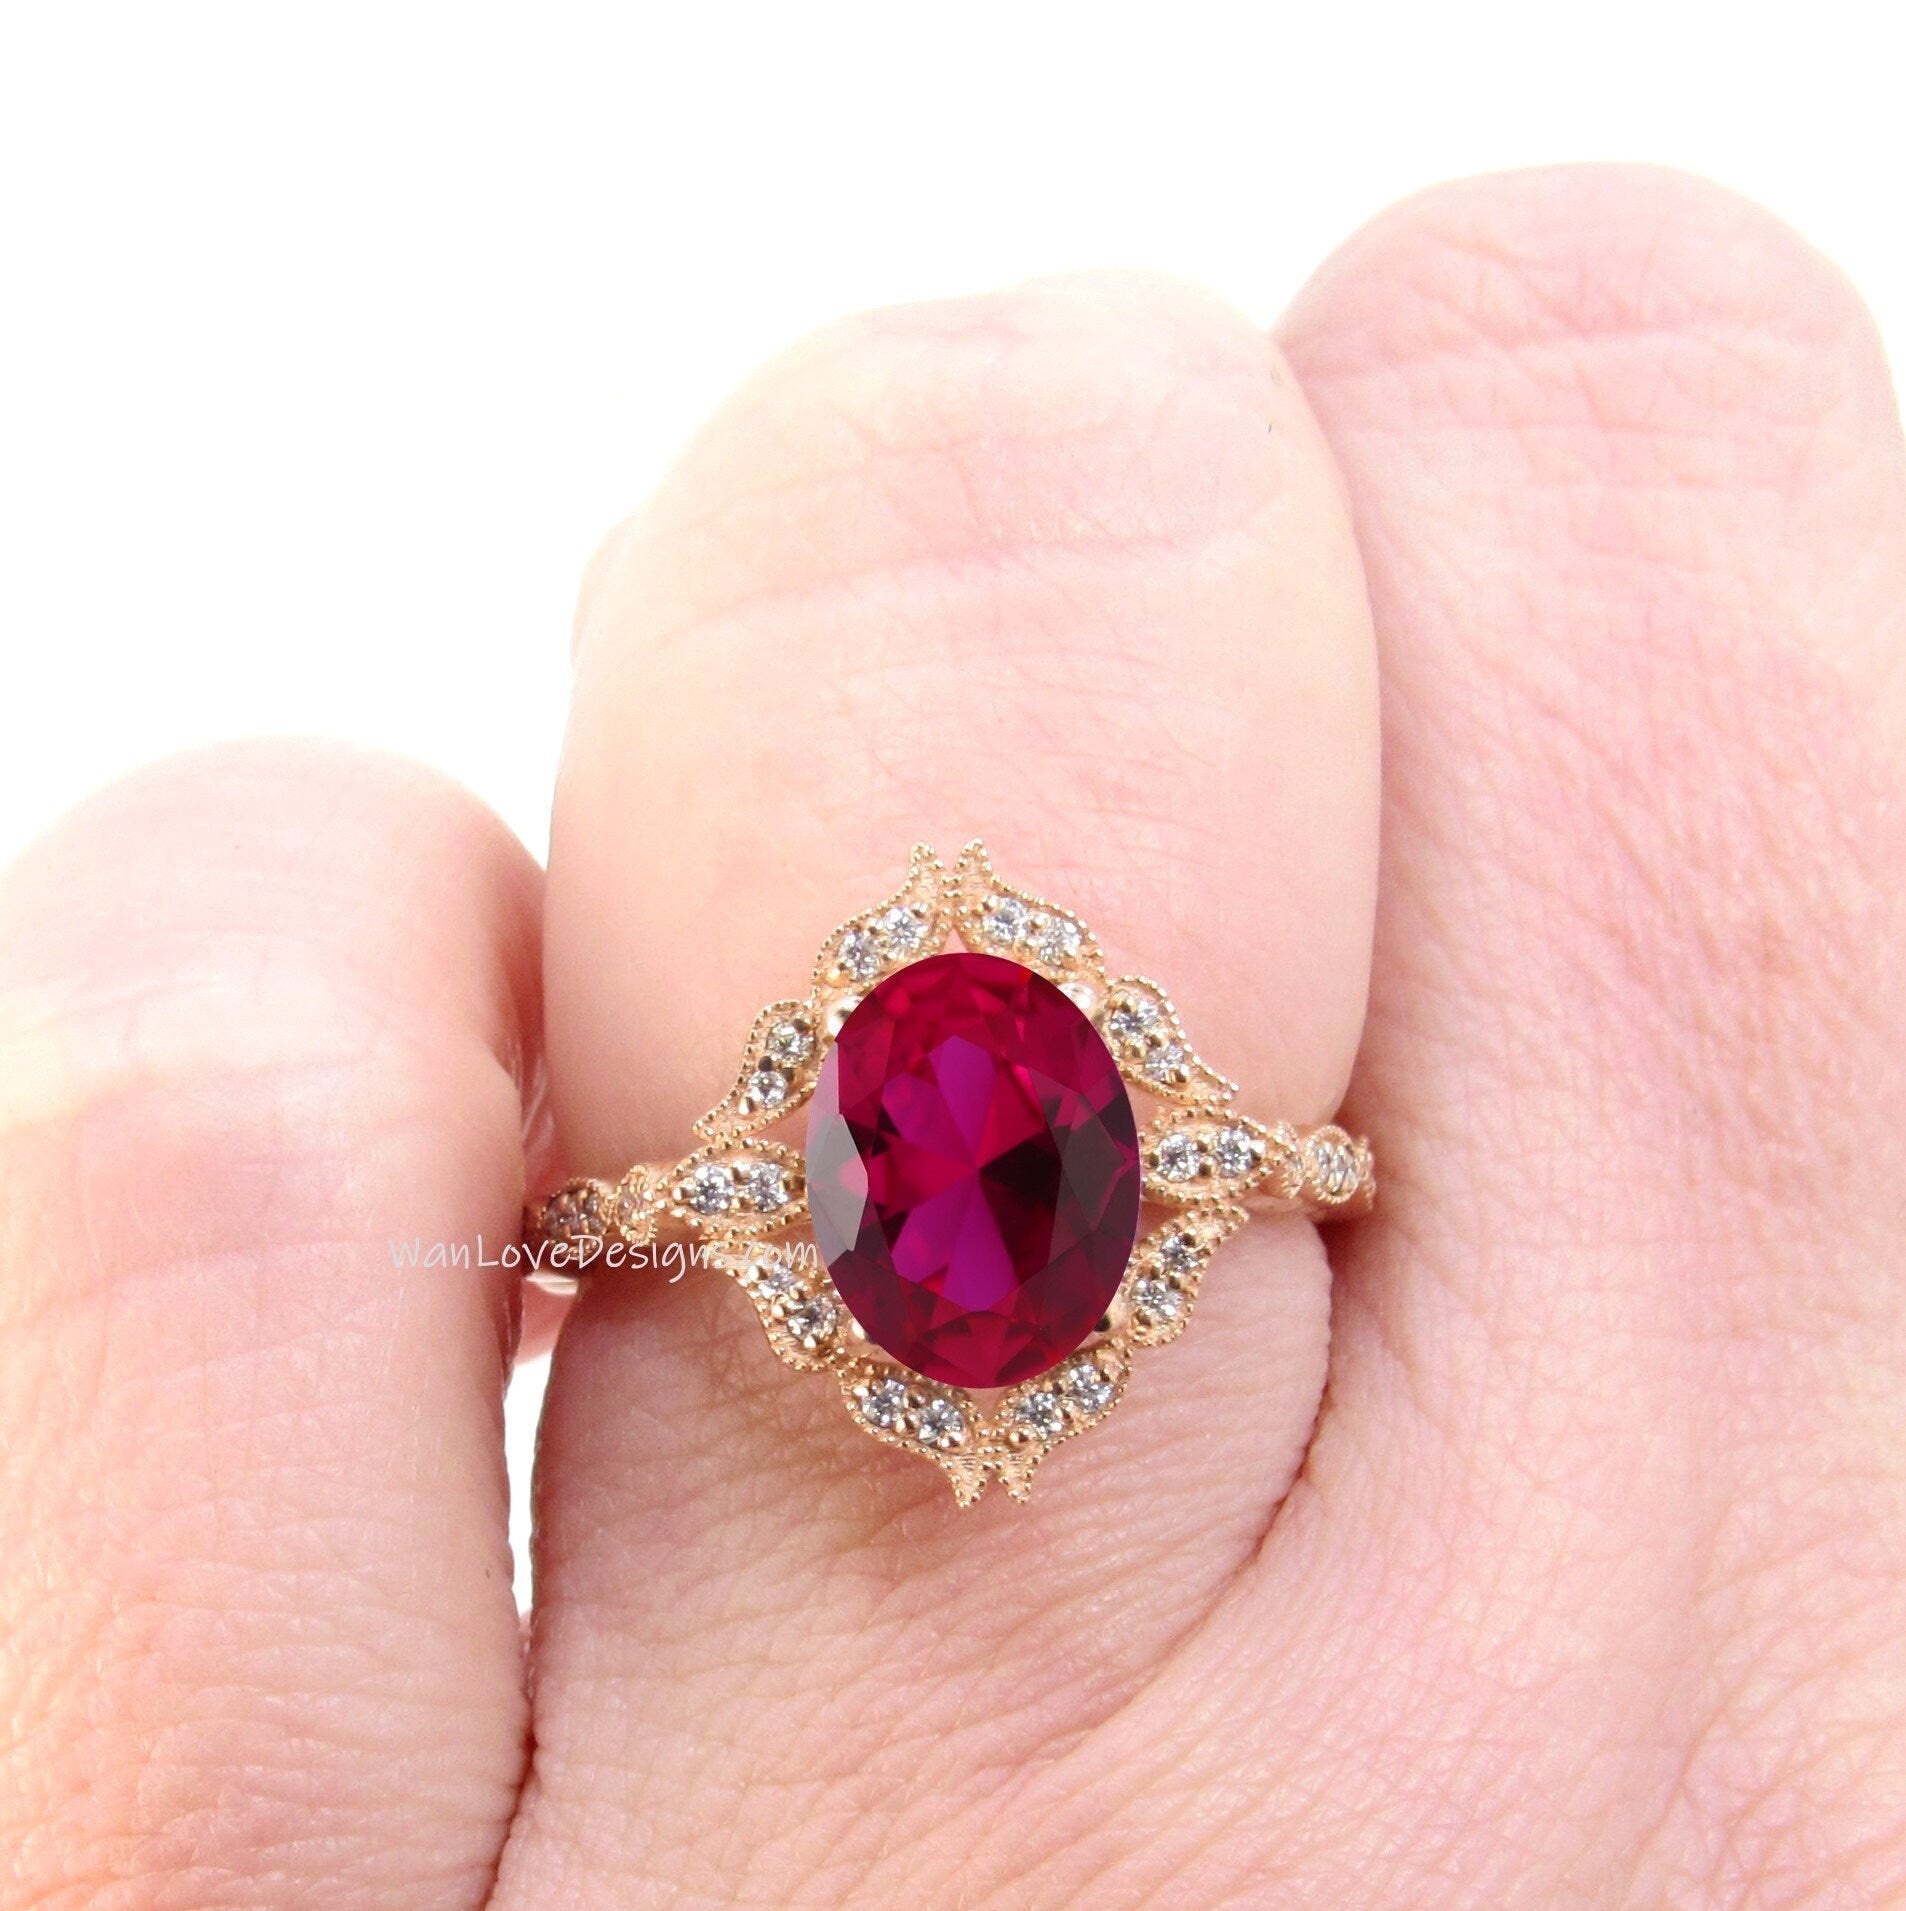 Oval Ruby Diamond Ring, Art Deco Ruby Floral Diamond Ring, Ruby Milgrain Ring vintage rose gold Engagement Ring promise anniversary ring Wan Love Designs